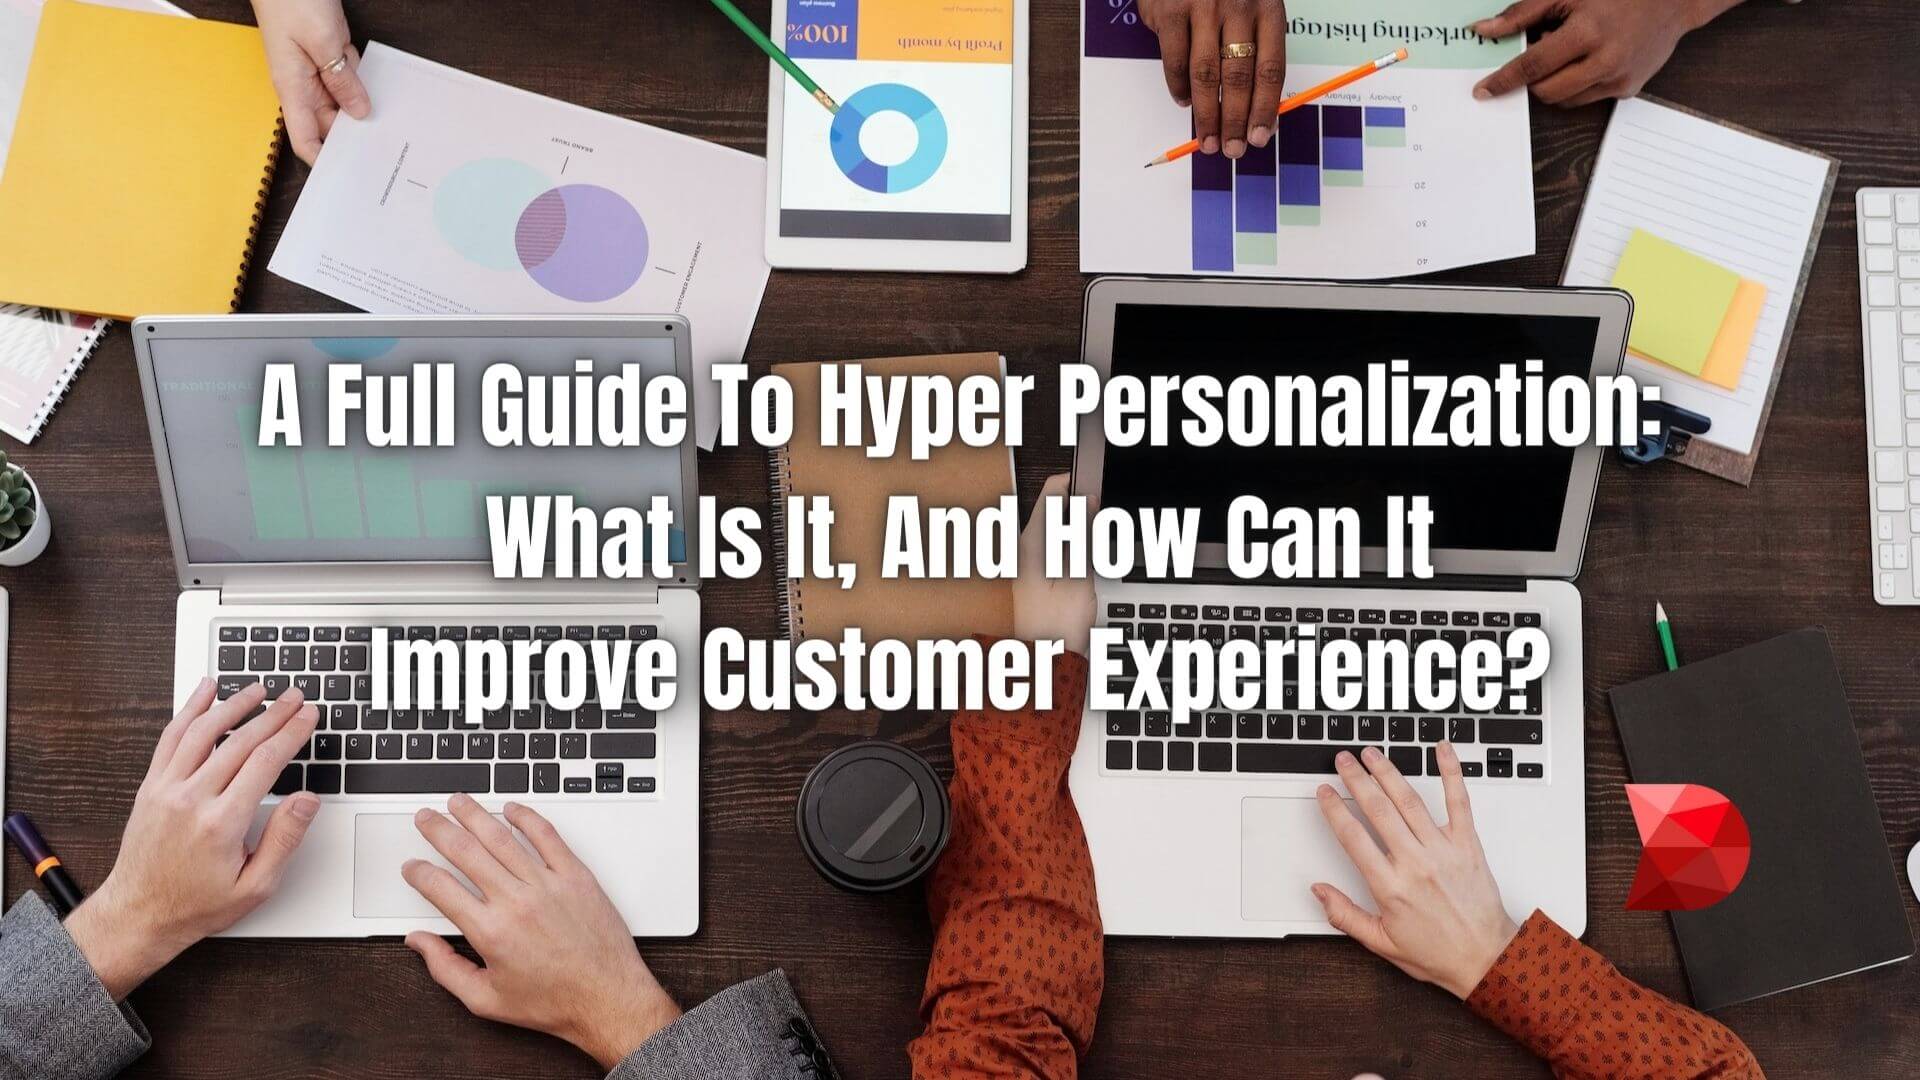 Hyper-personalization offers customers unique experiences. Here's how it can be used to improve customer experience.